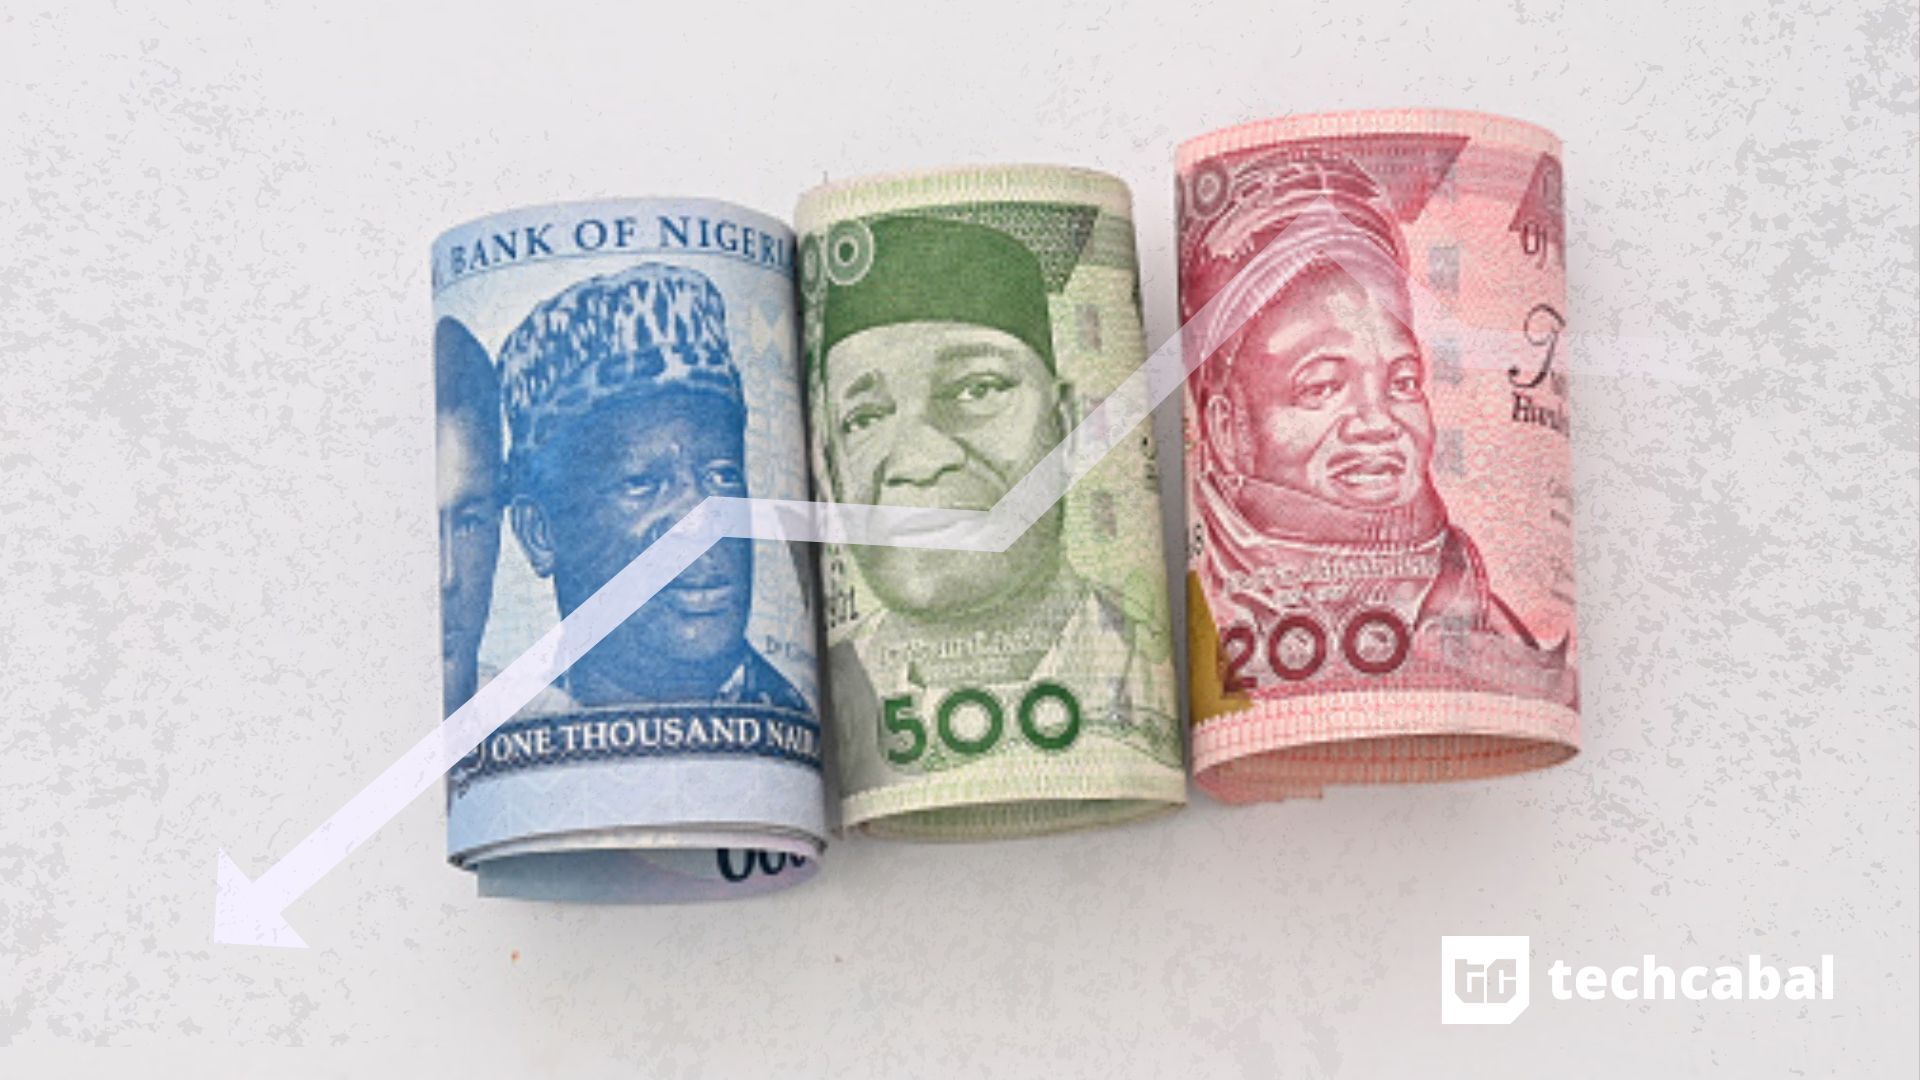 With an impending naira devaluation, what’s at stake for Nigerians?